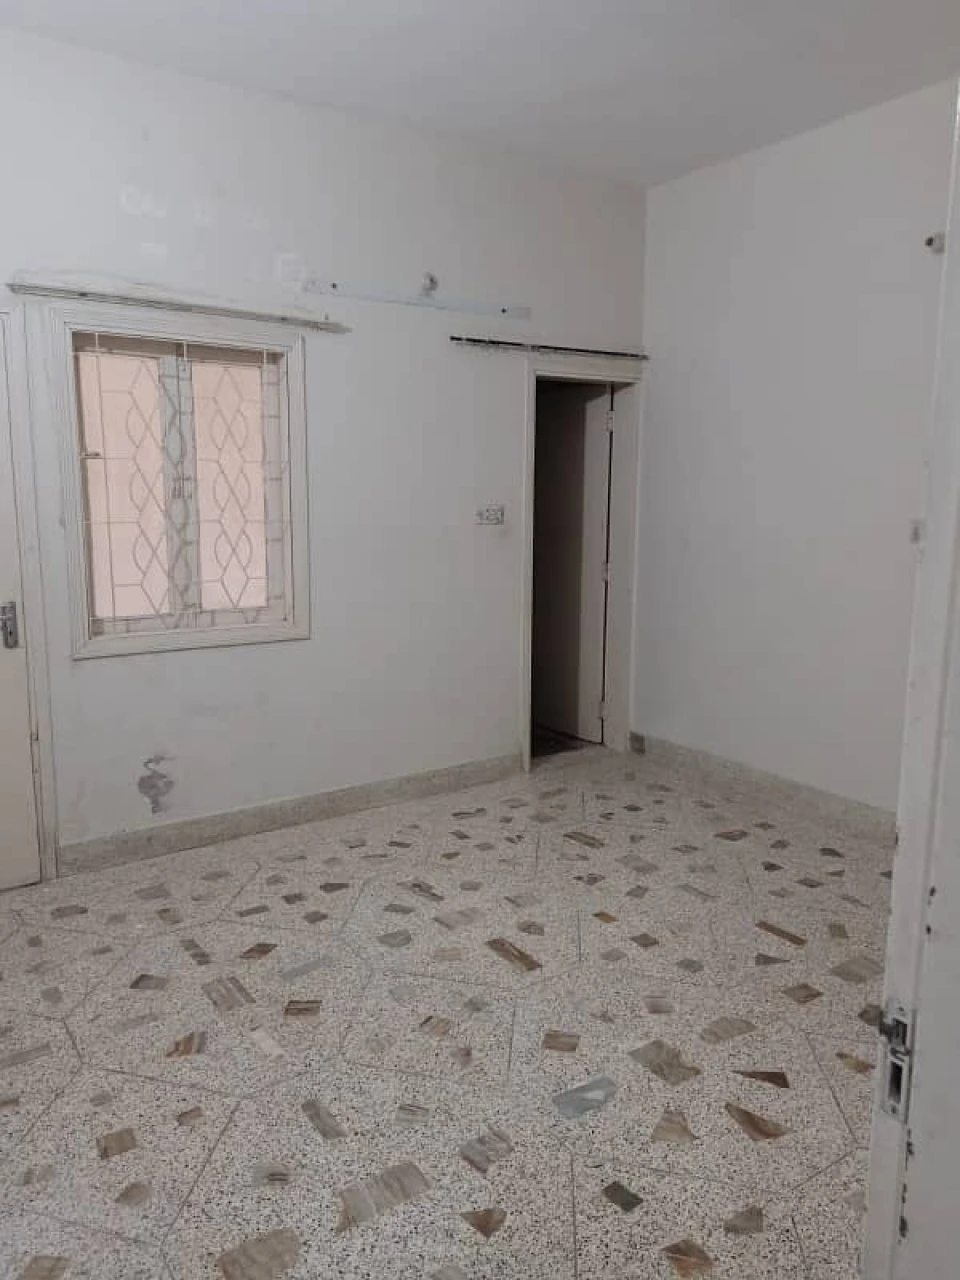 Ideal house in karachi available for